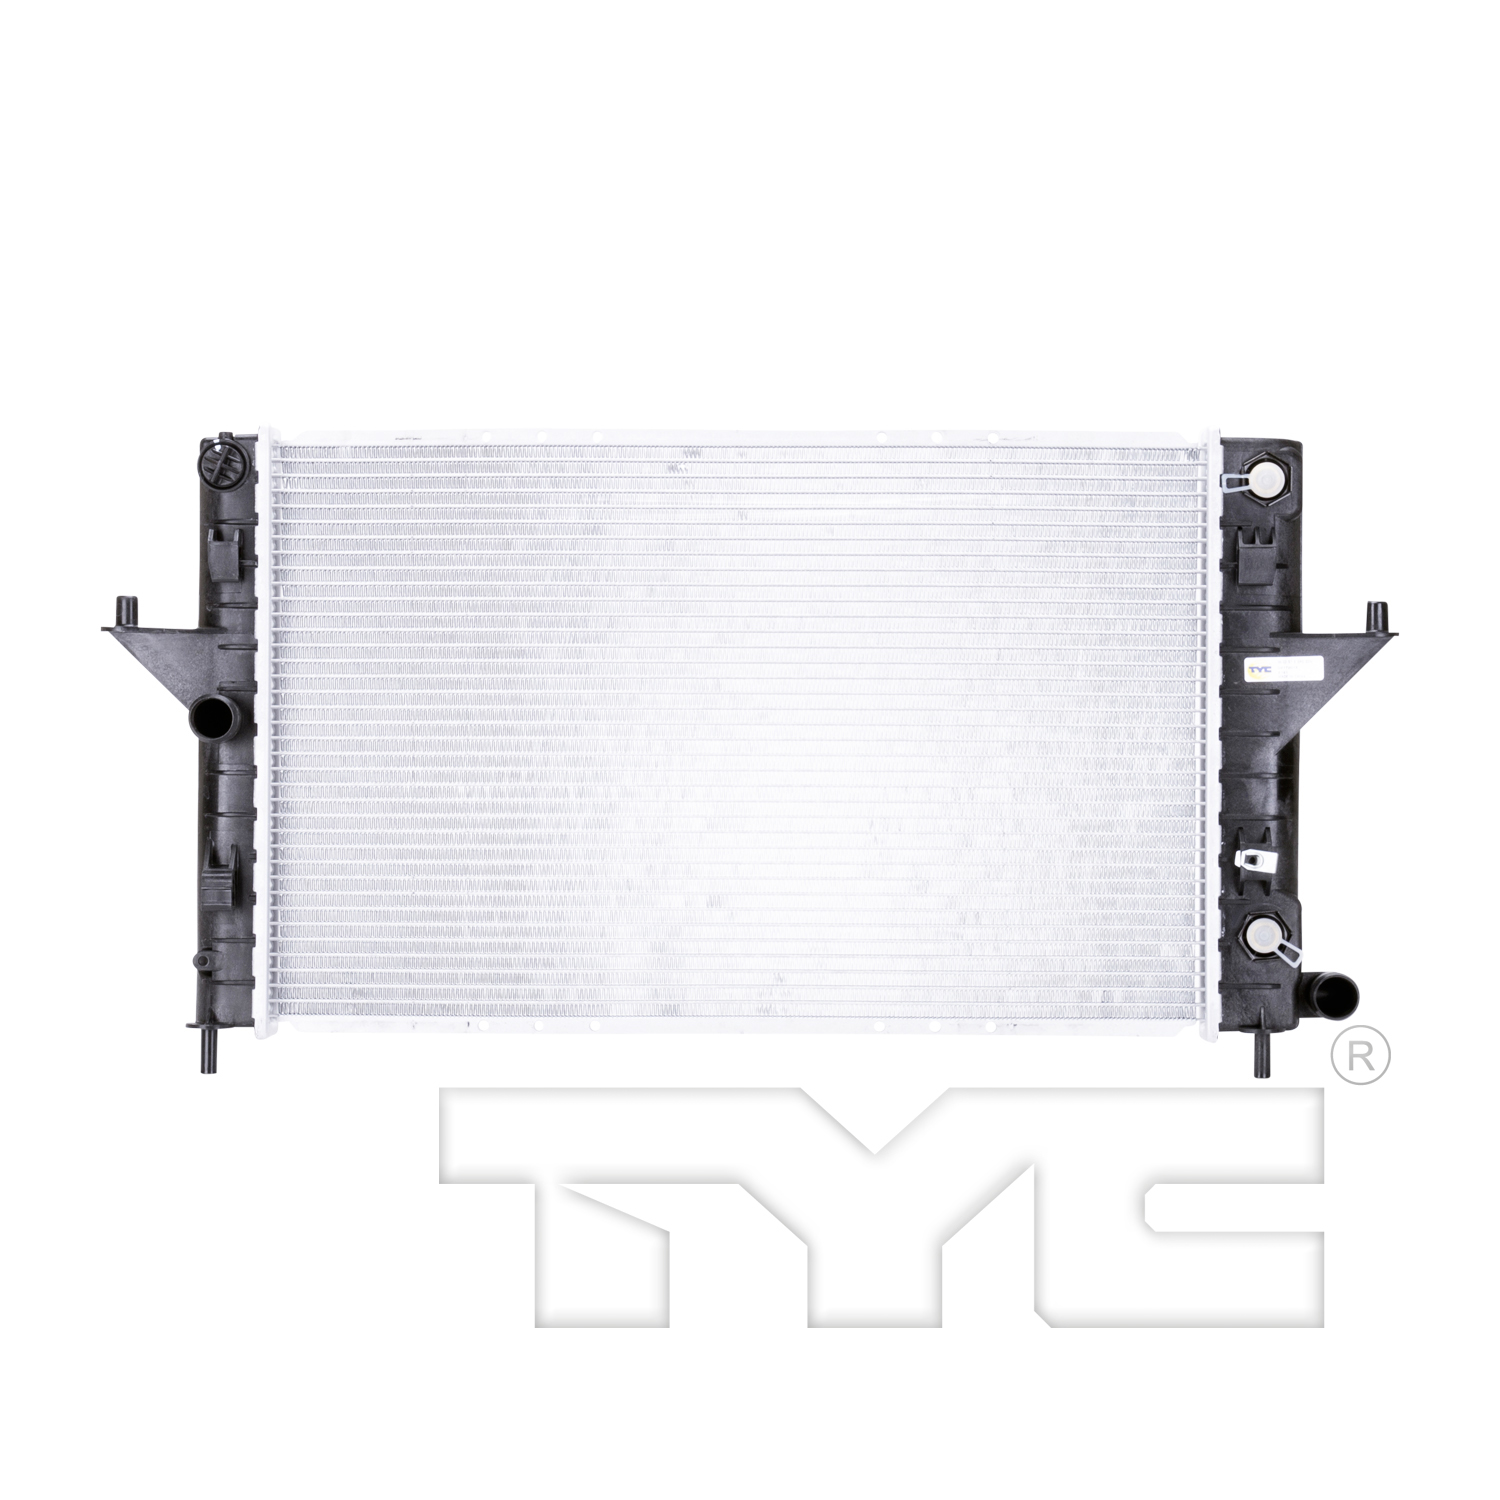 Aftermarket RADIATORS for SATURN - SW1, SW1,94-99,Radiator assembly